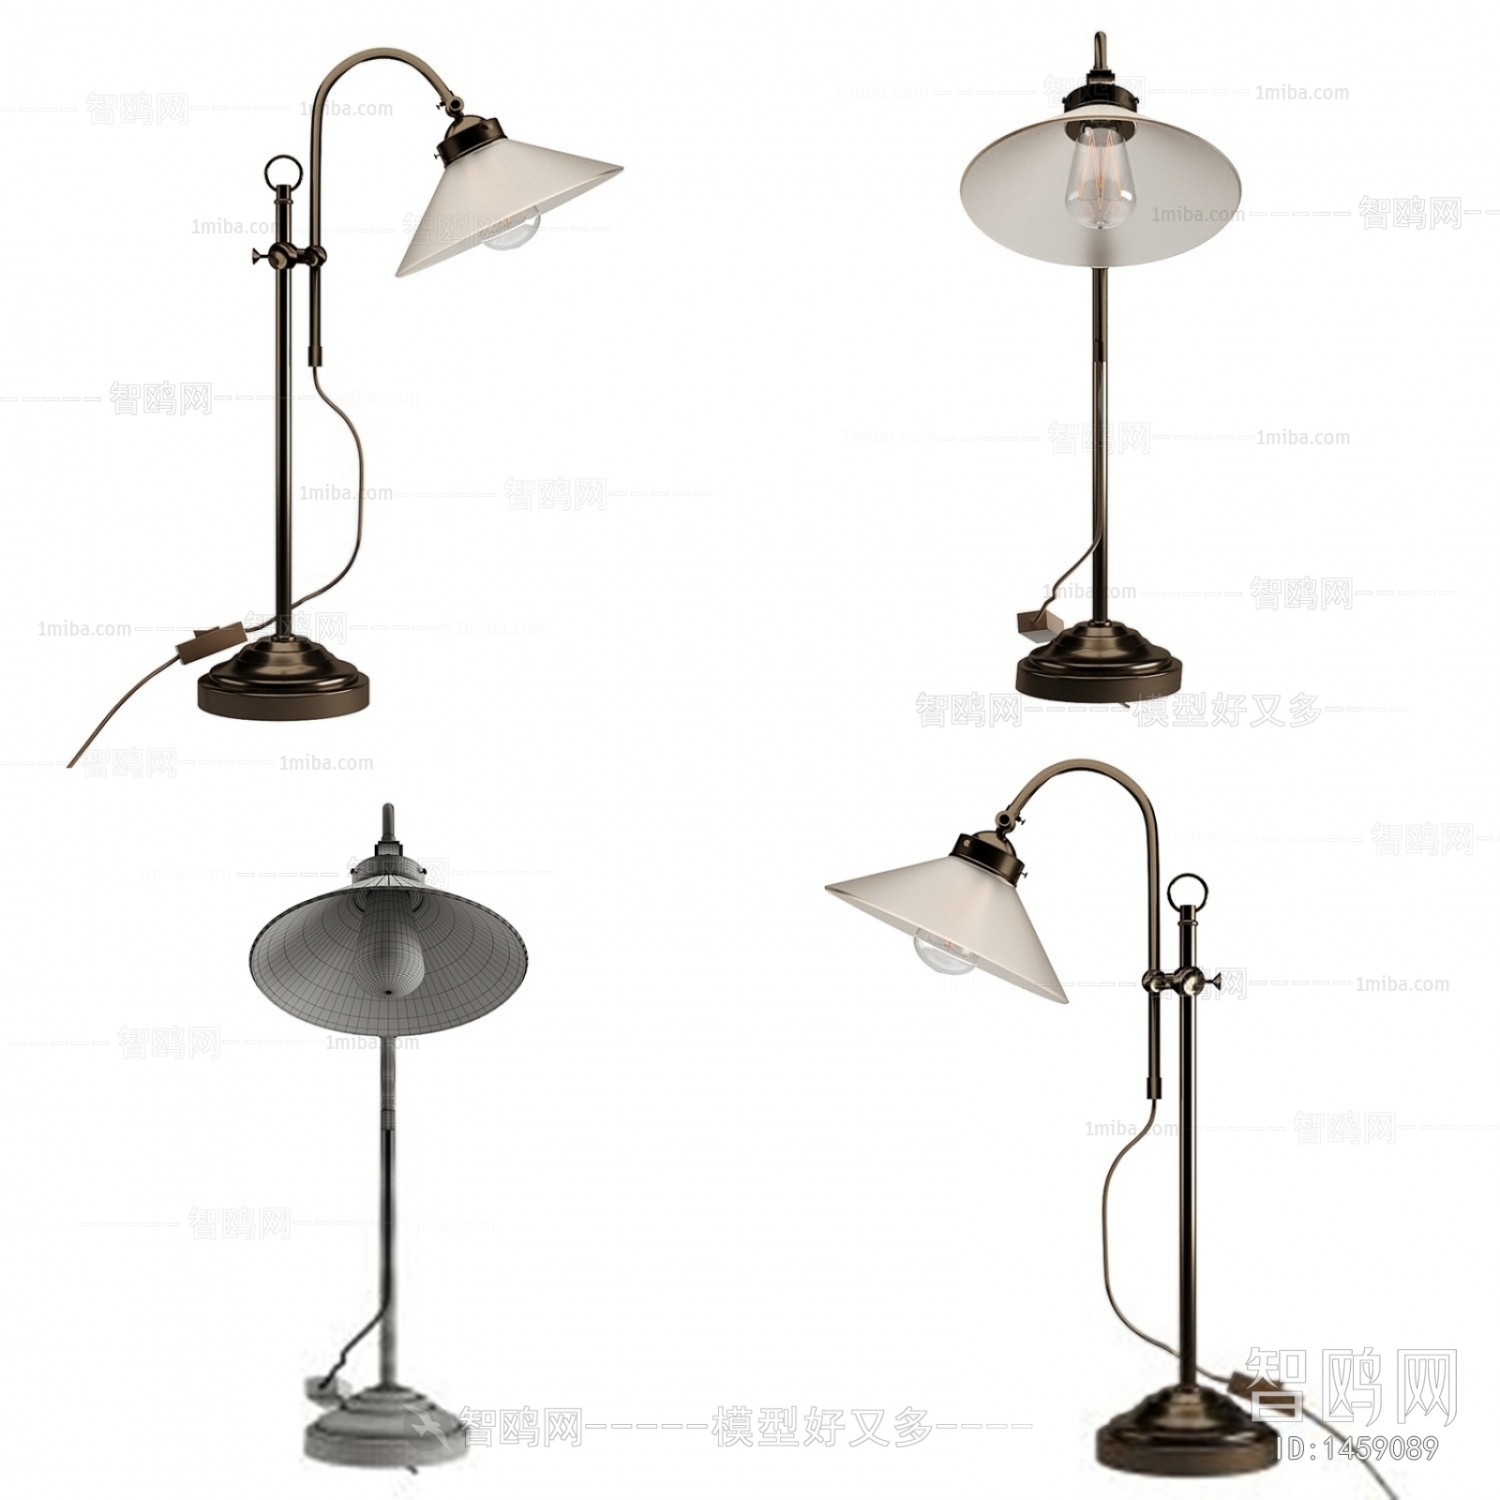 Modern Industrial Style Table Lamp